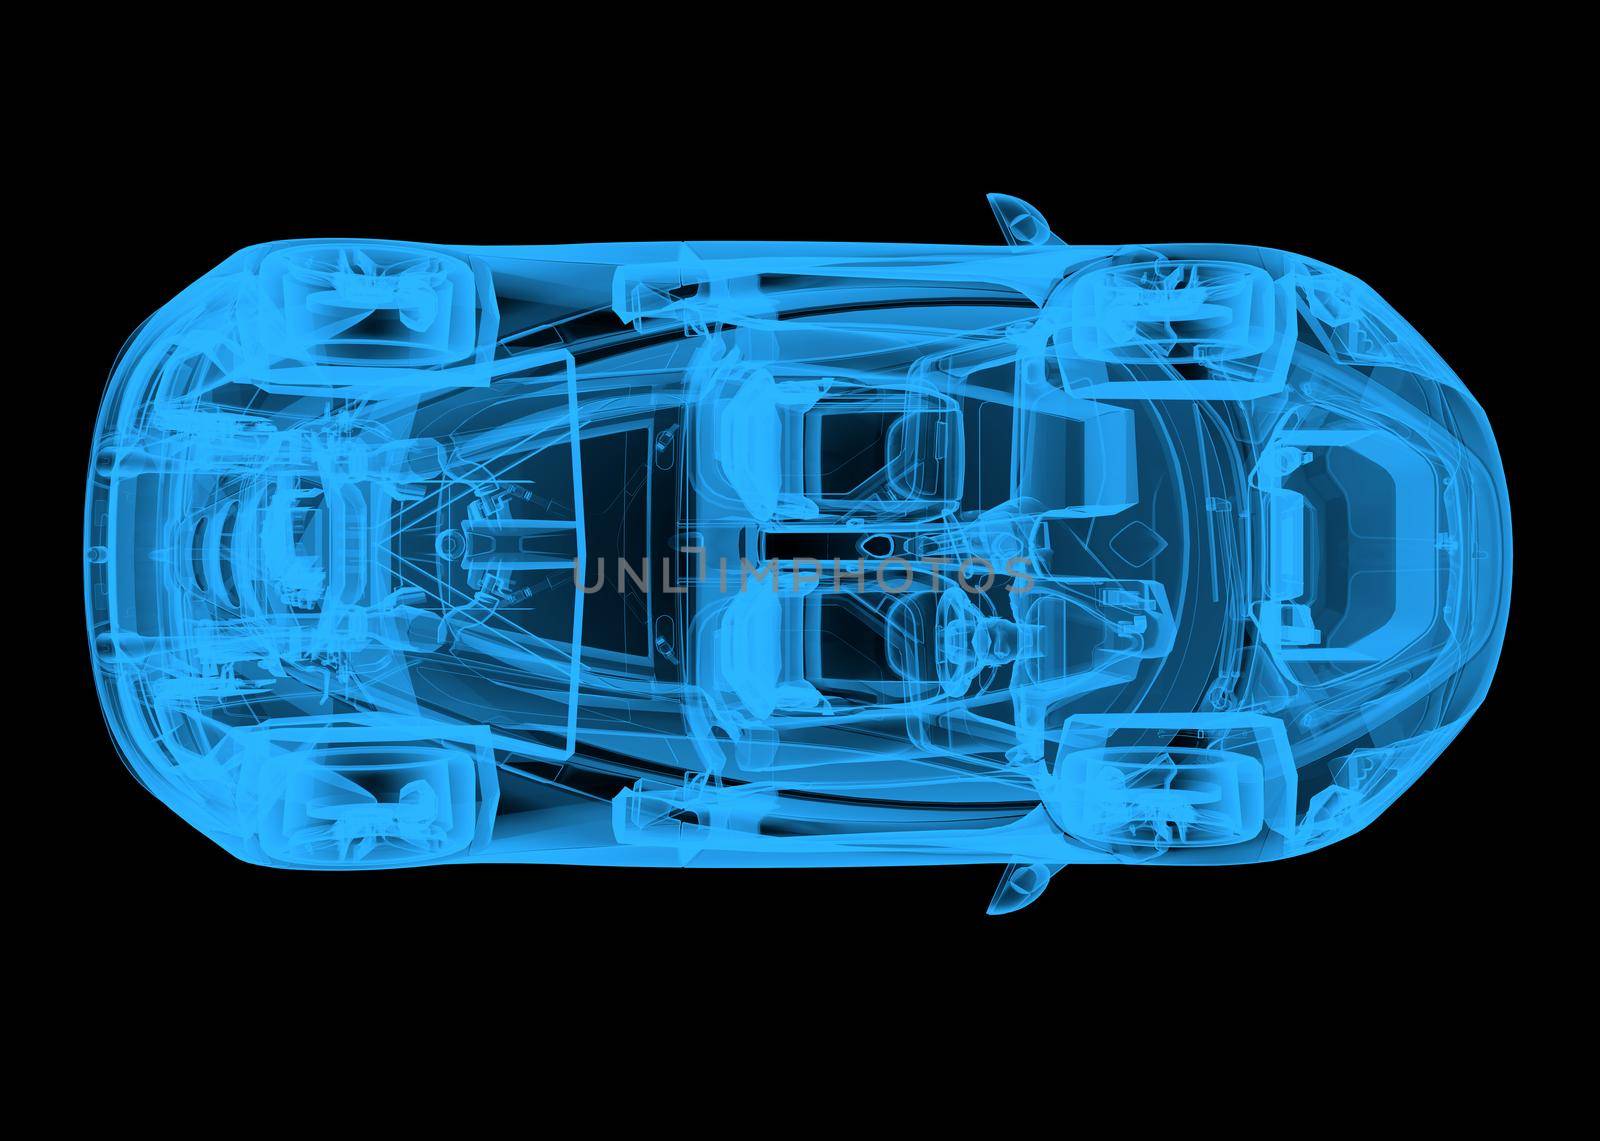 Top view of a wireframe blue car on a black background by cla78